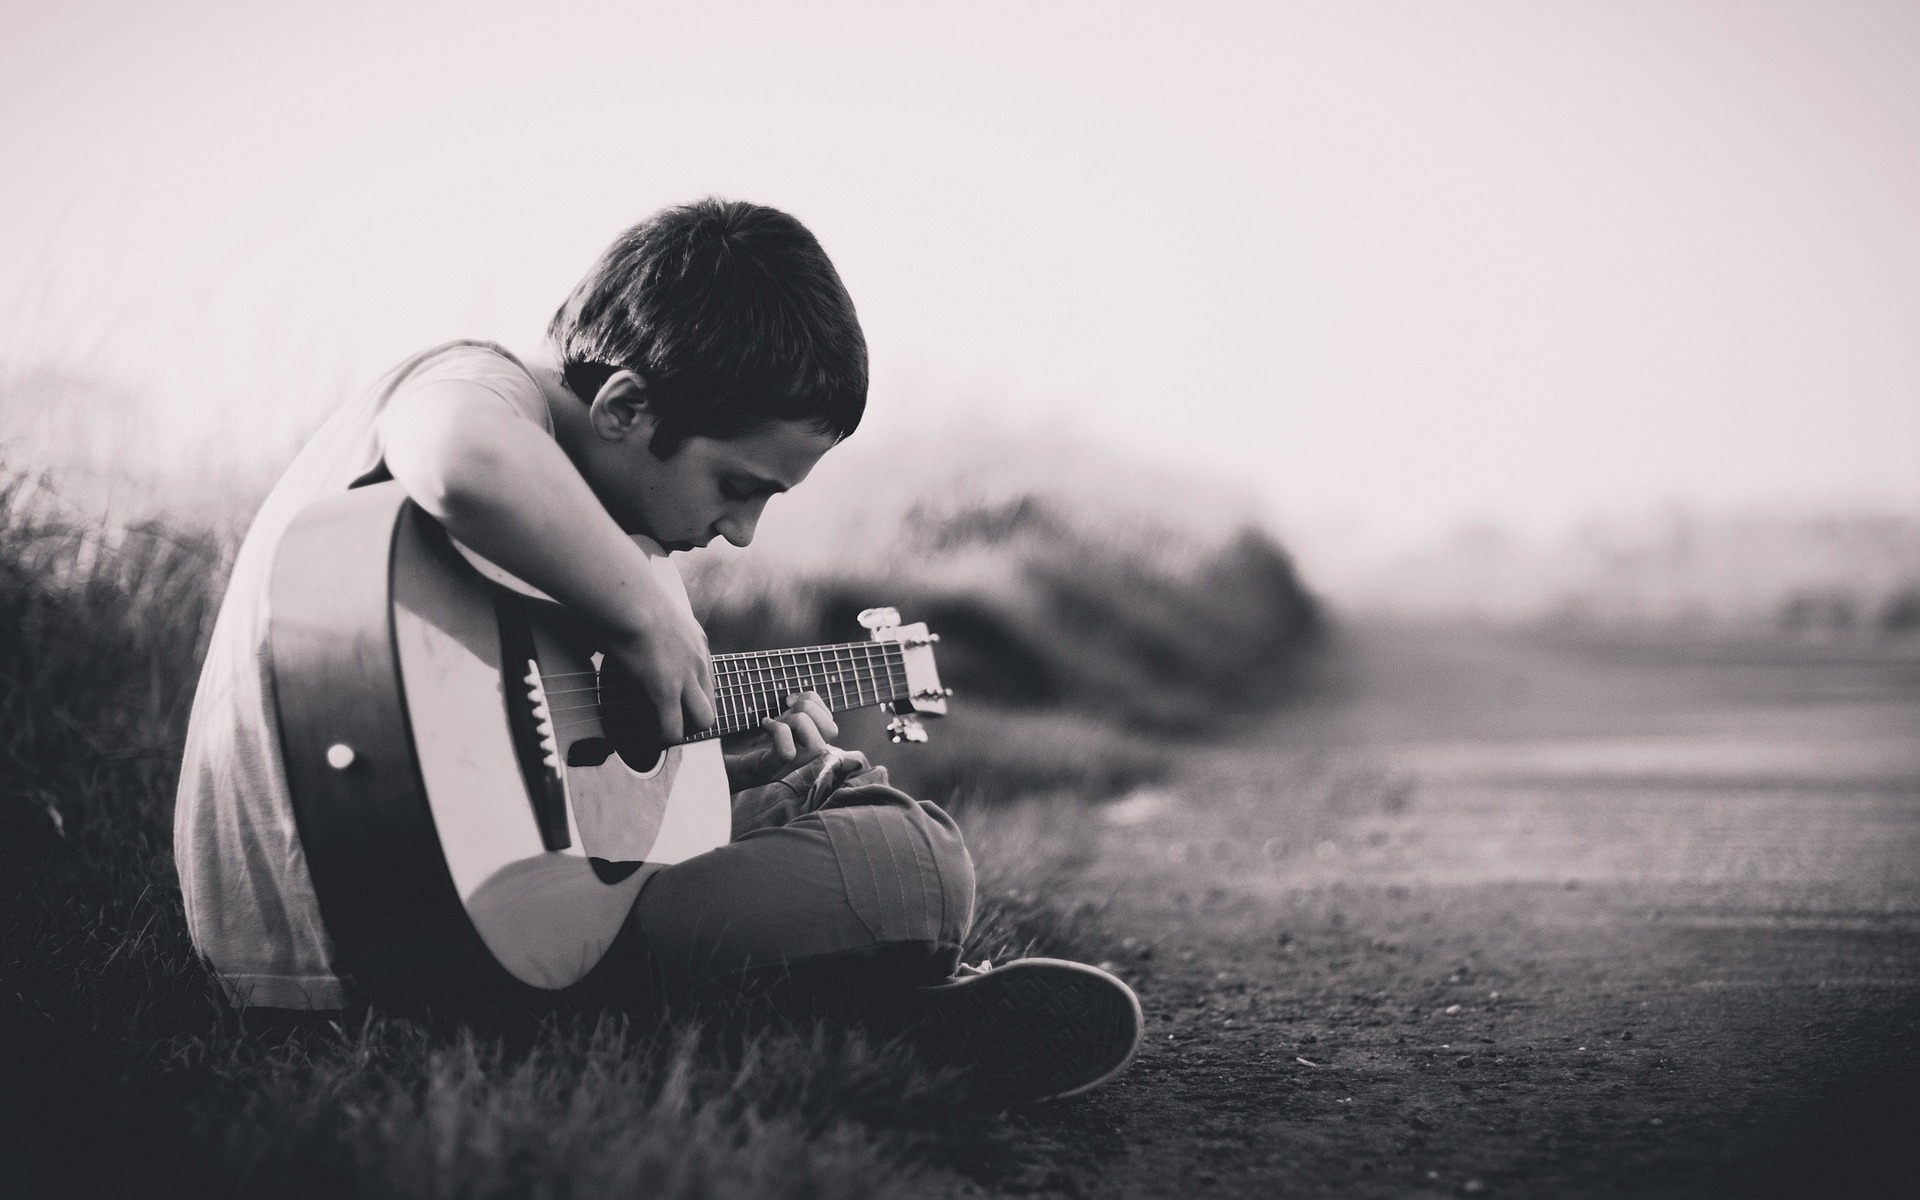 sepia-toned photo of boy playing guitar by side of rural road